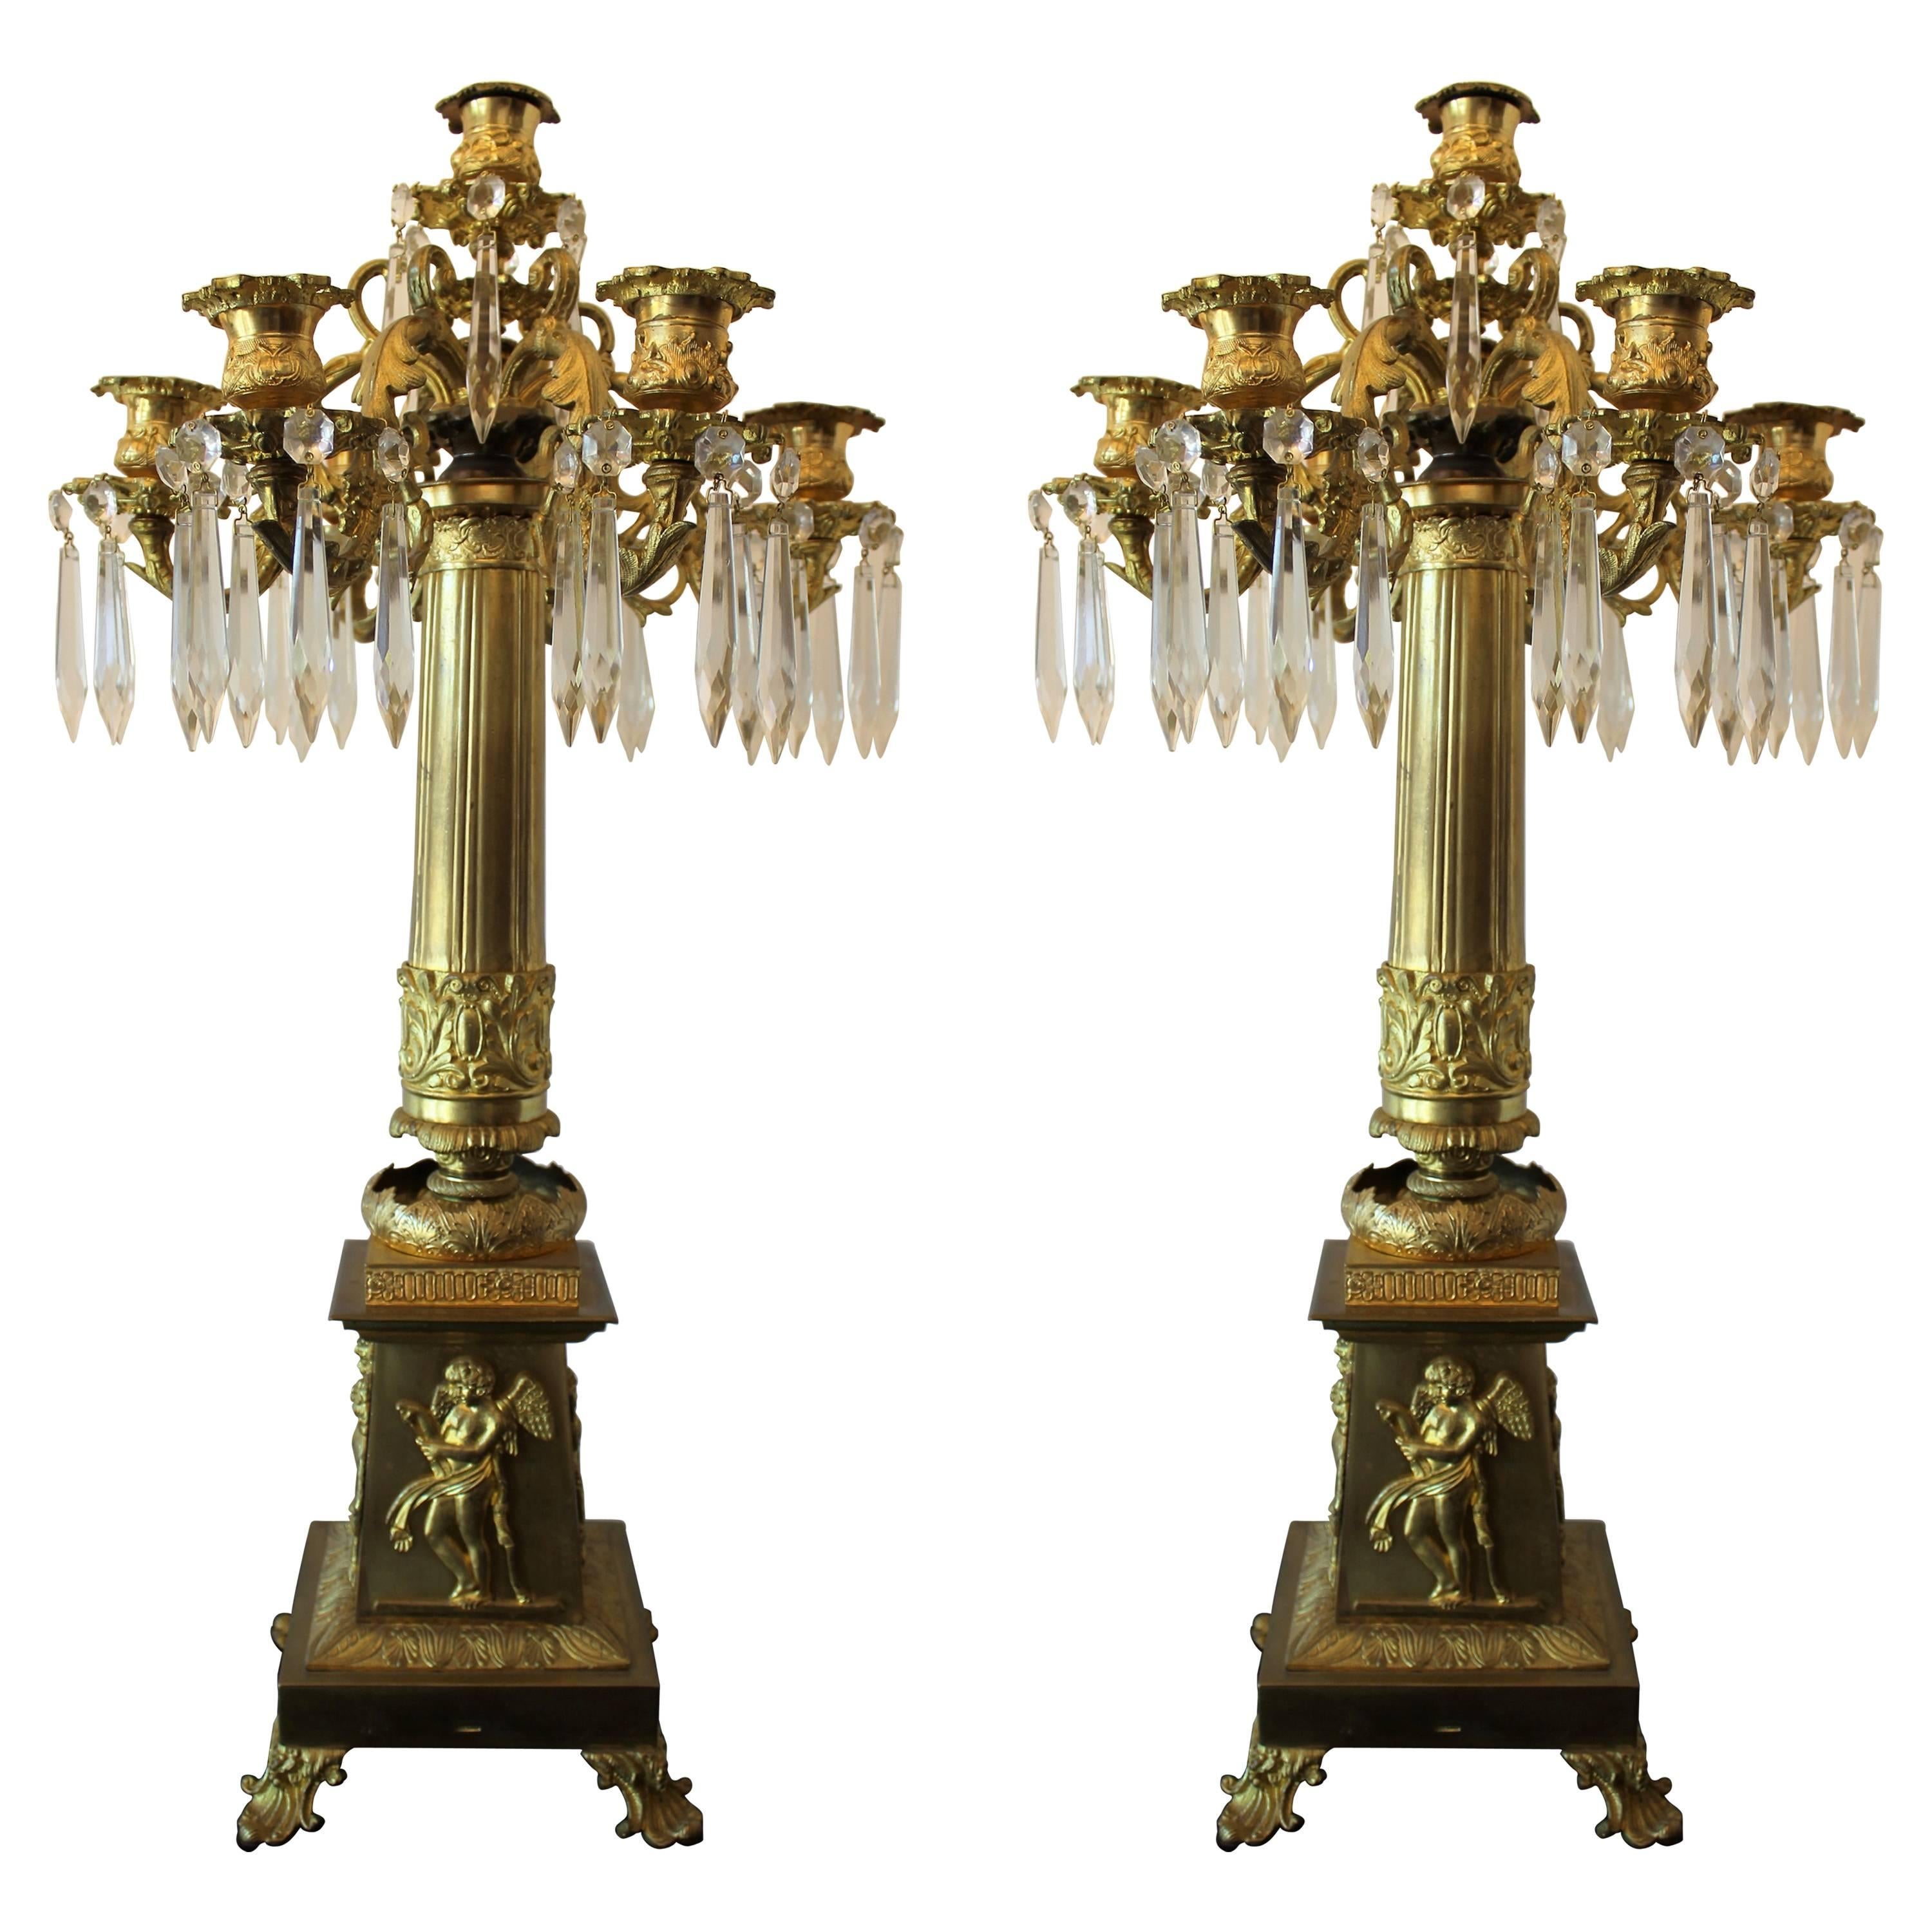 Pair of Russian Ormolu Patinated Bronze and Crystal Candelabras by P. Chizhov